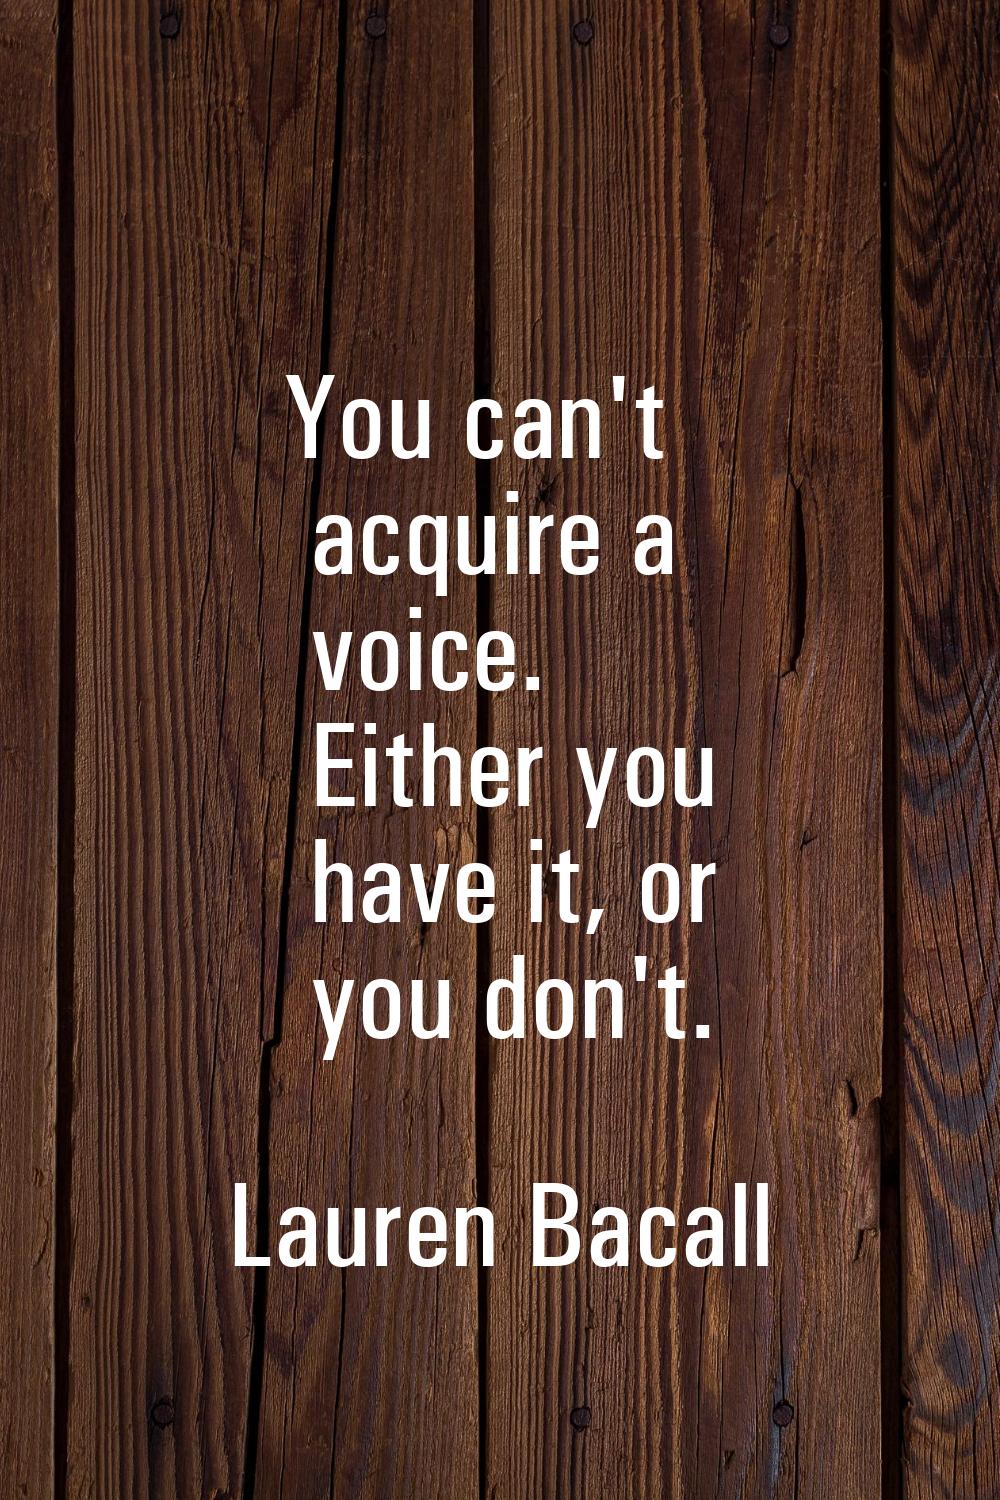 You can't acquire a voice. Either you have it, or you don't.